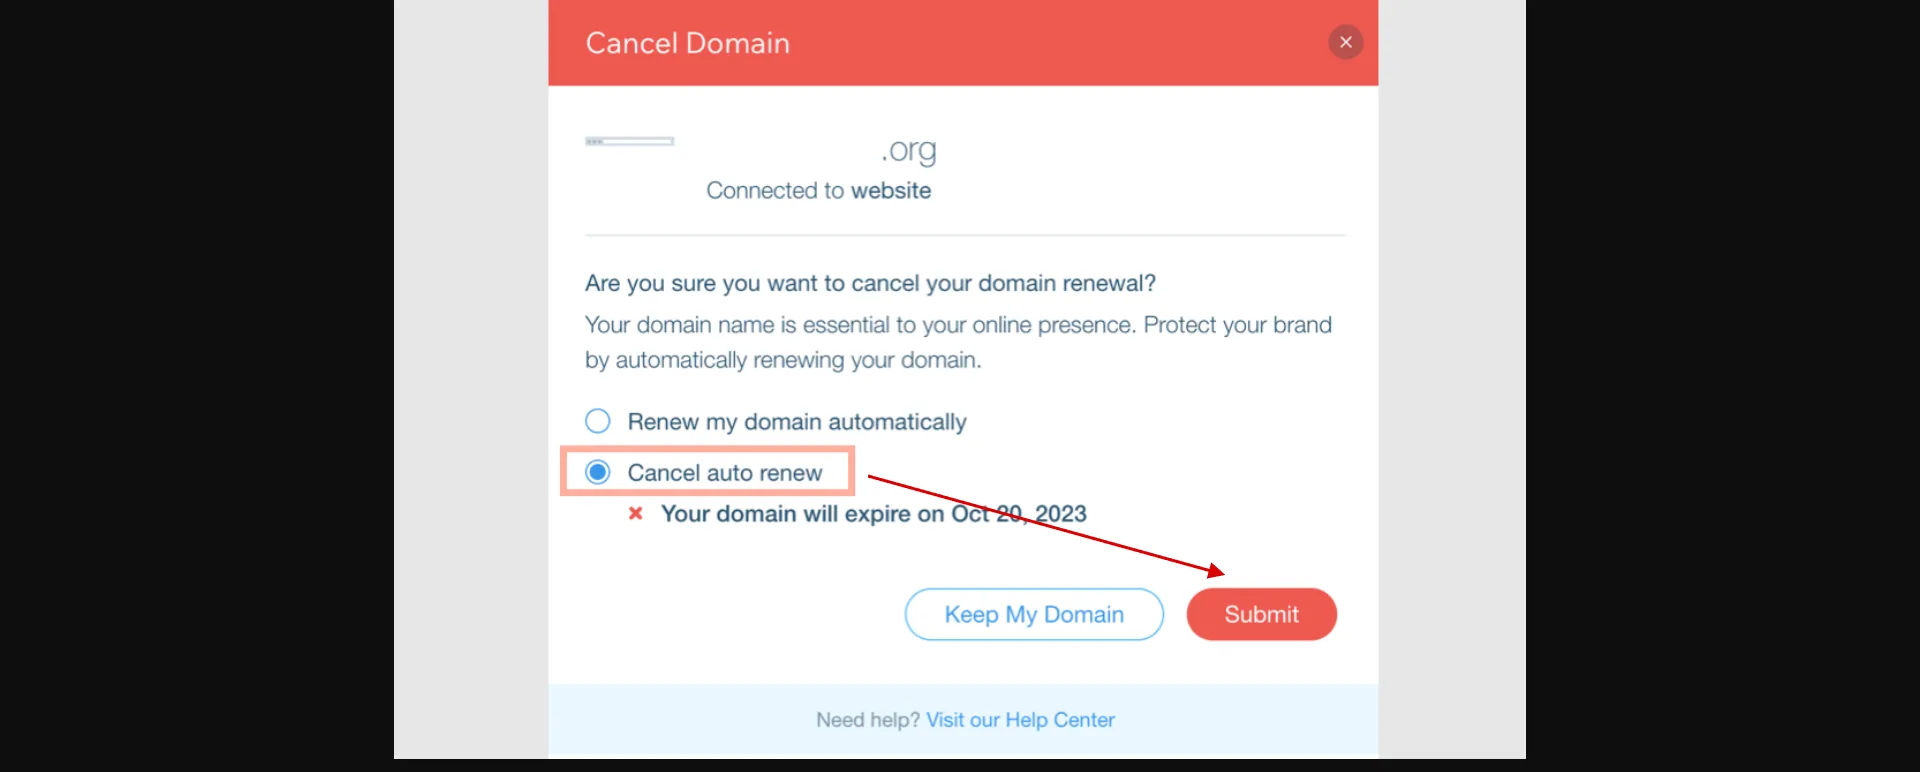 Click Submit to cancel domain